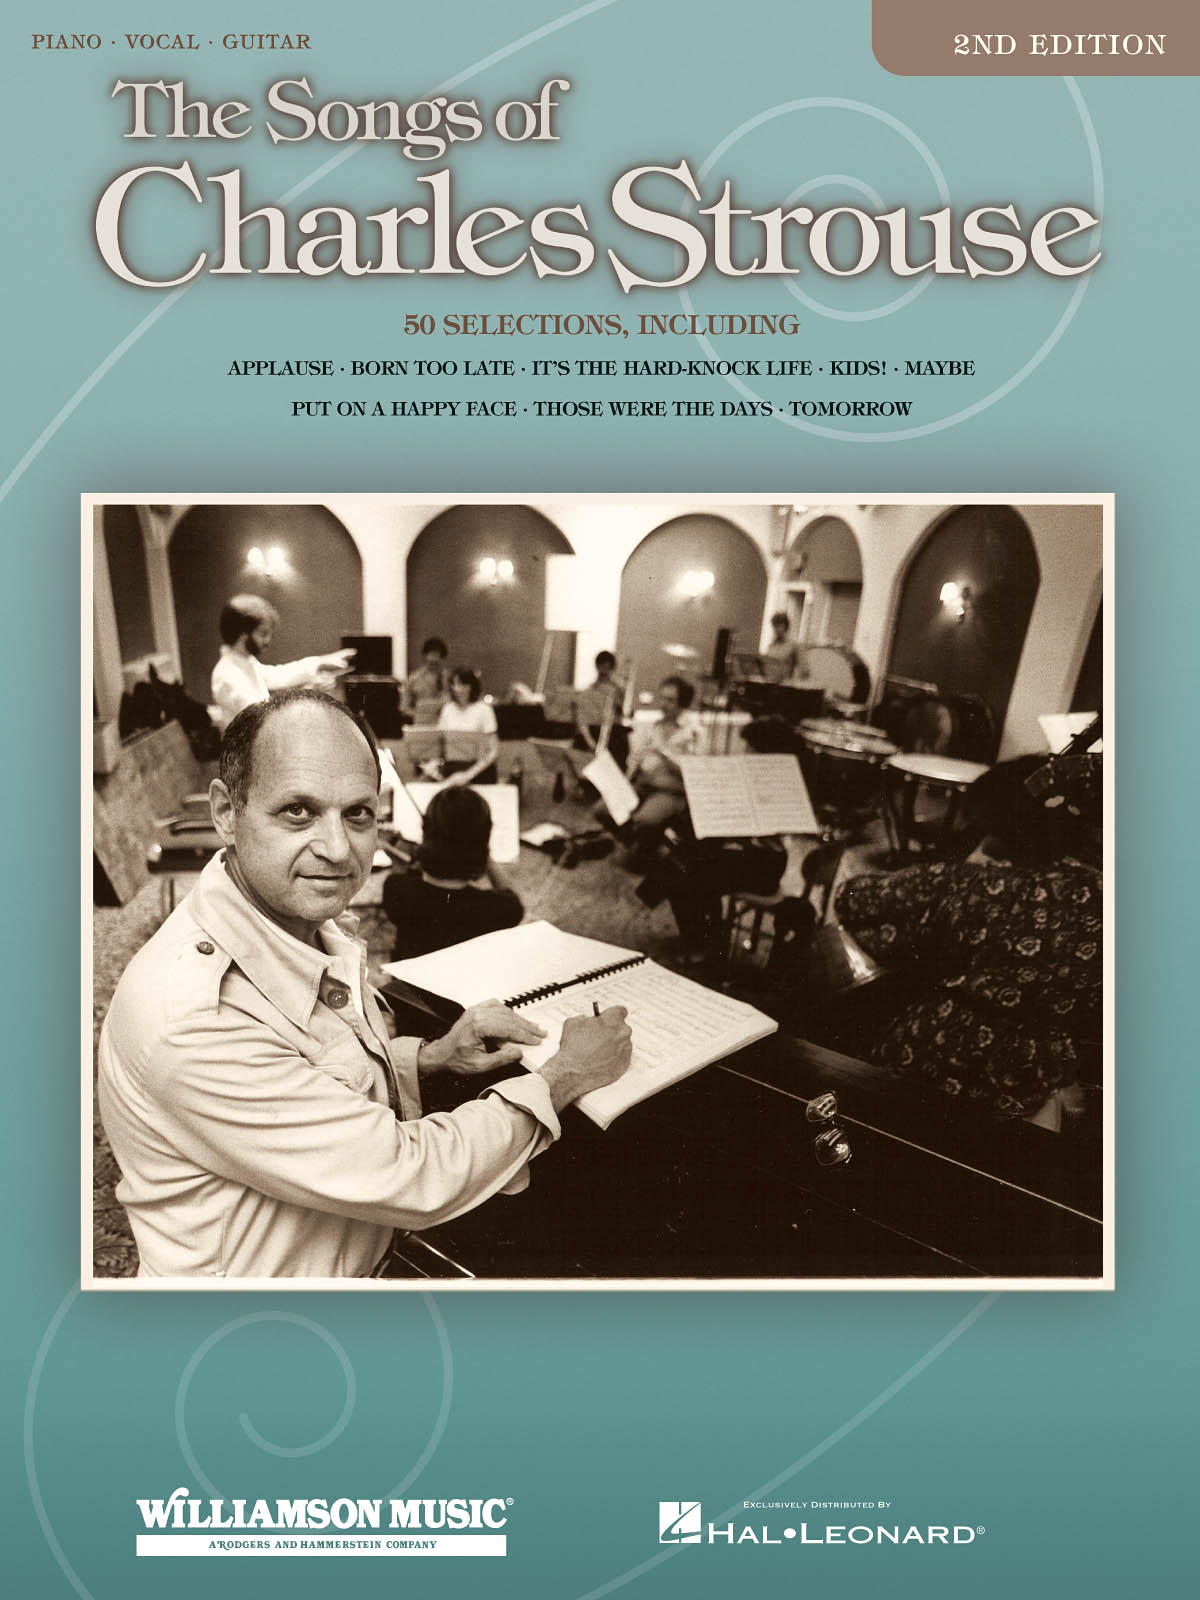 Charles Strouse: The Songs of Charles Strouse - 2nd Edition: Piano  Vocal and